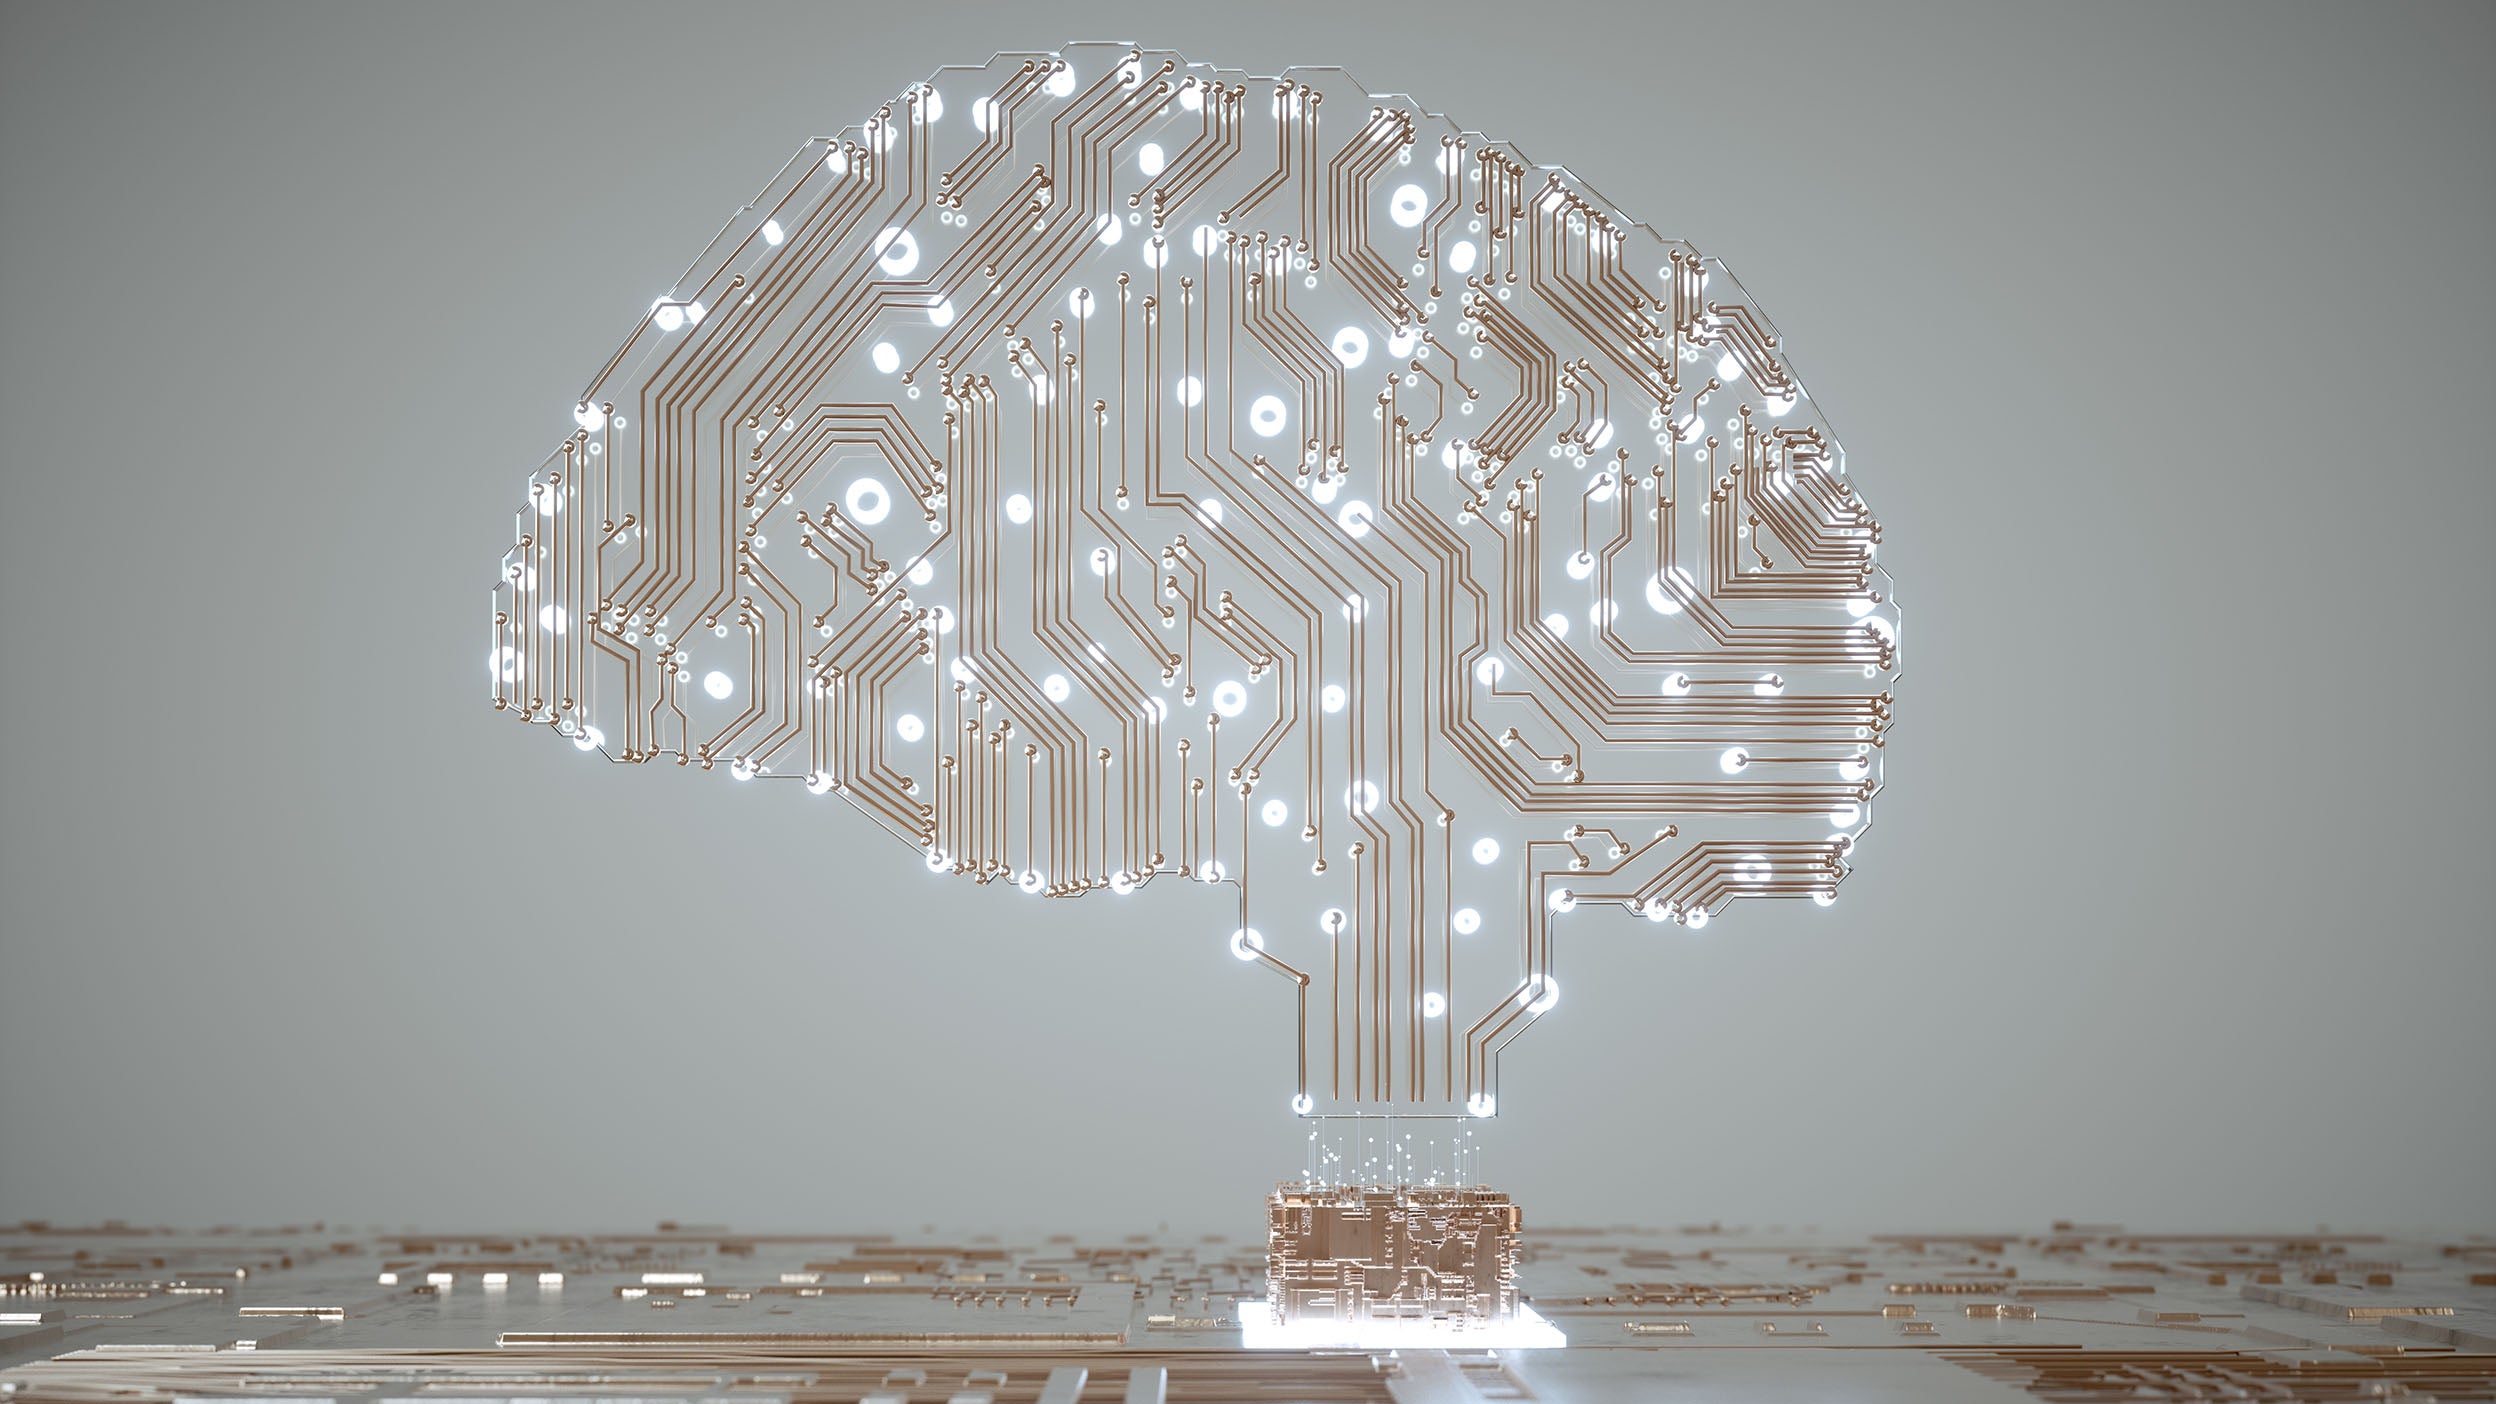 A large circuit board shaped like a brain represents how ETFs, like Invesco QQQ ETF, can potentially benefit core equity portfolios